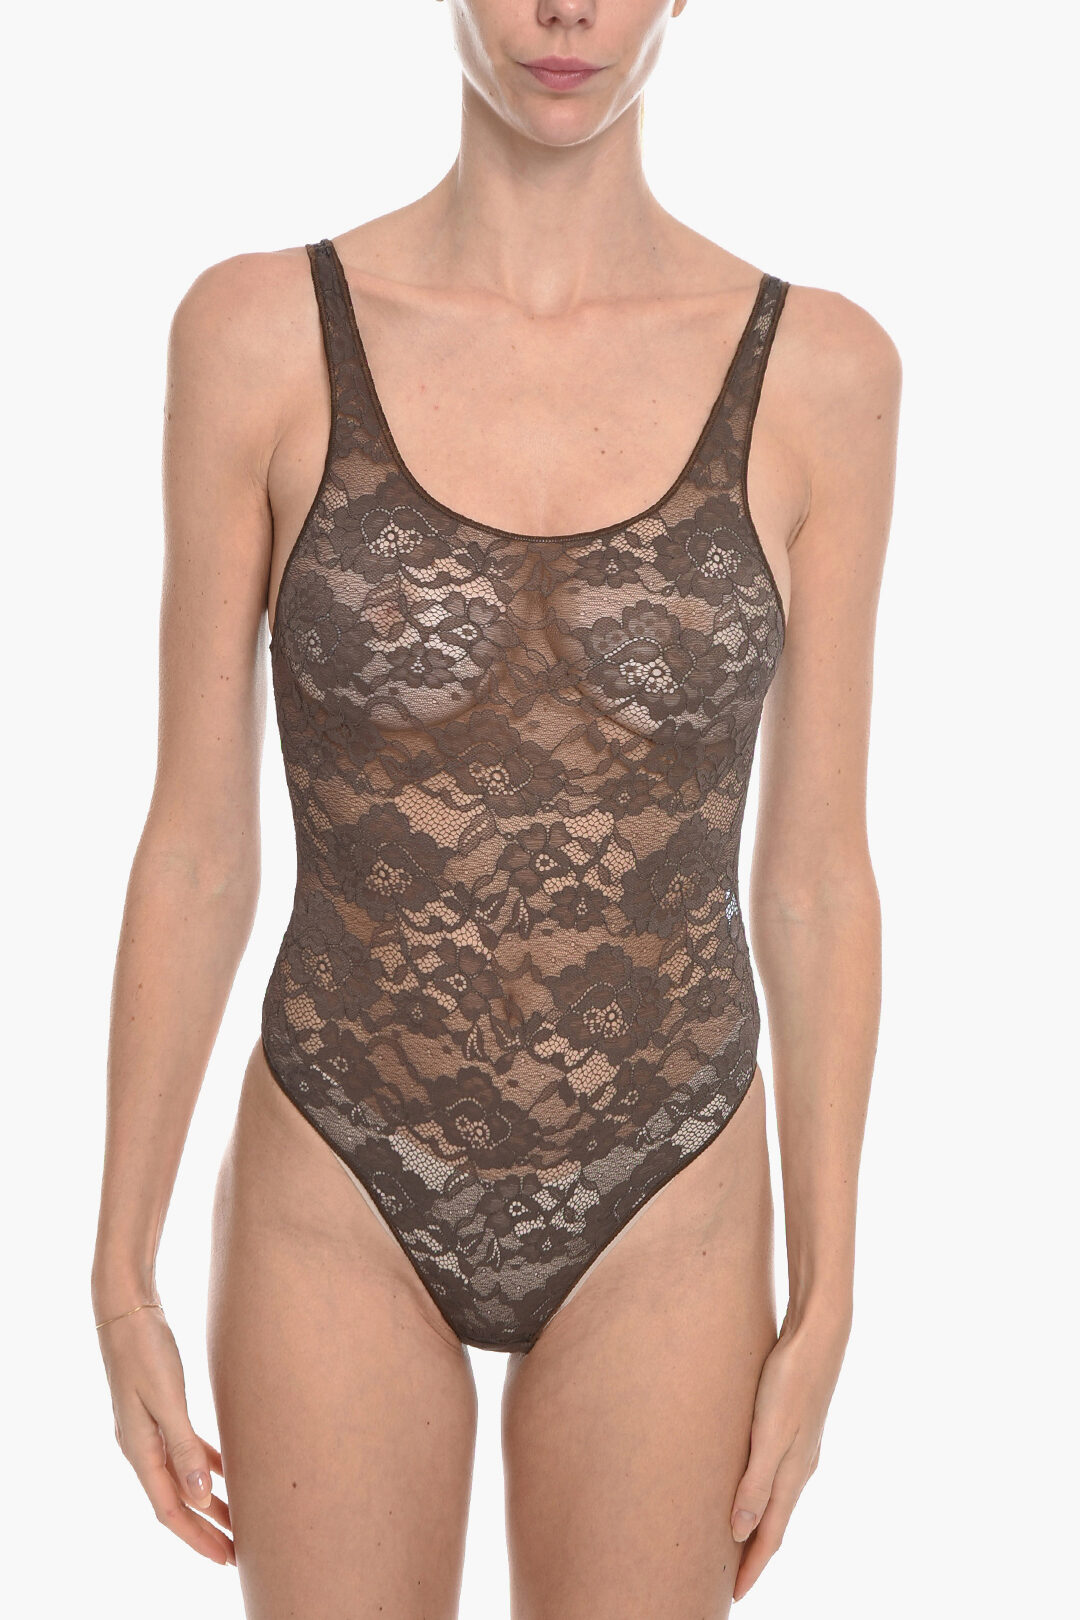 Oseree Solid Color Lace Bodysuit women - Glamood Outlet